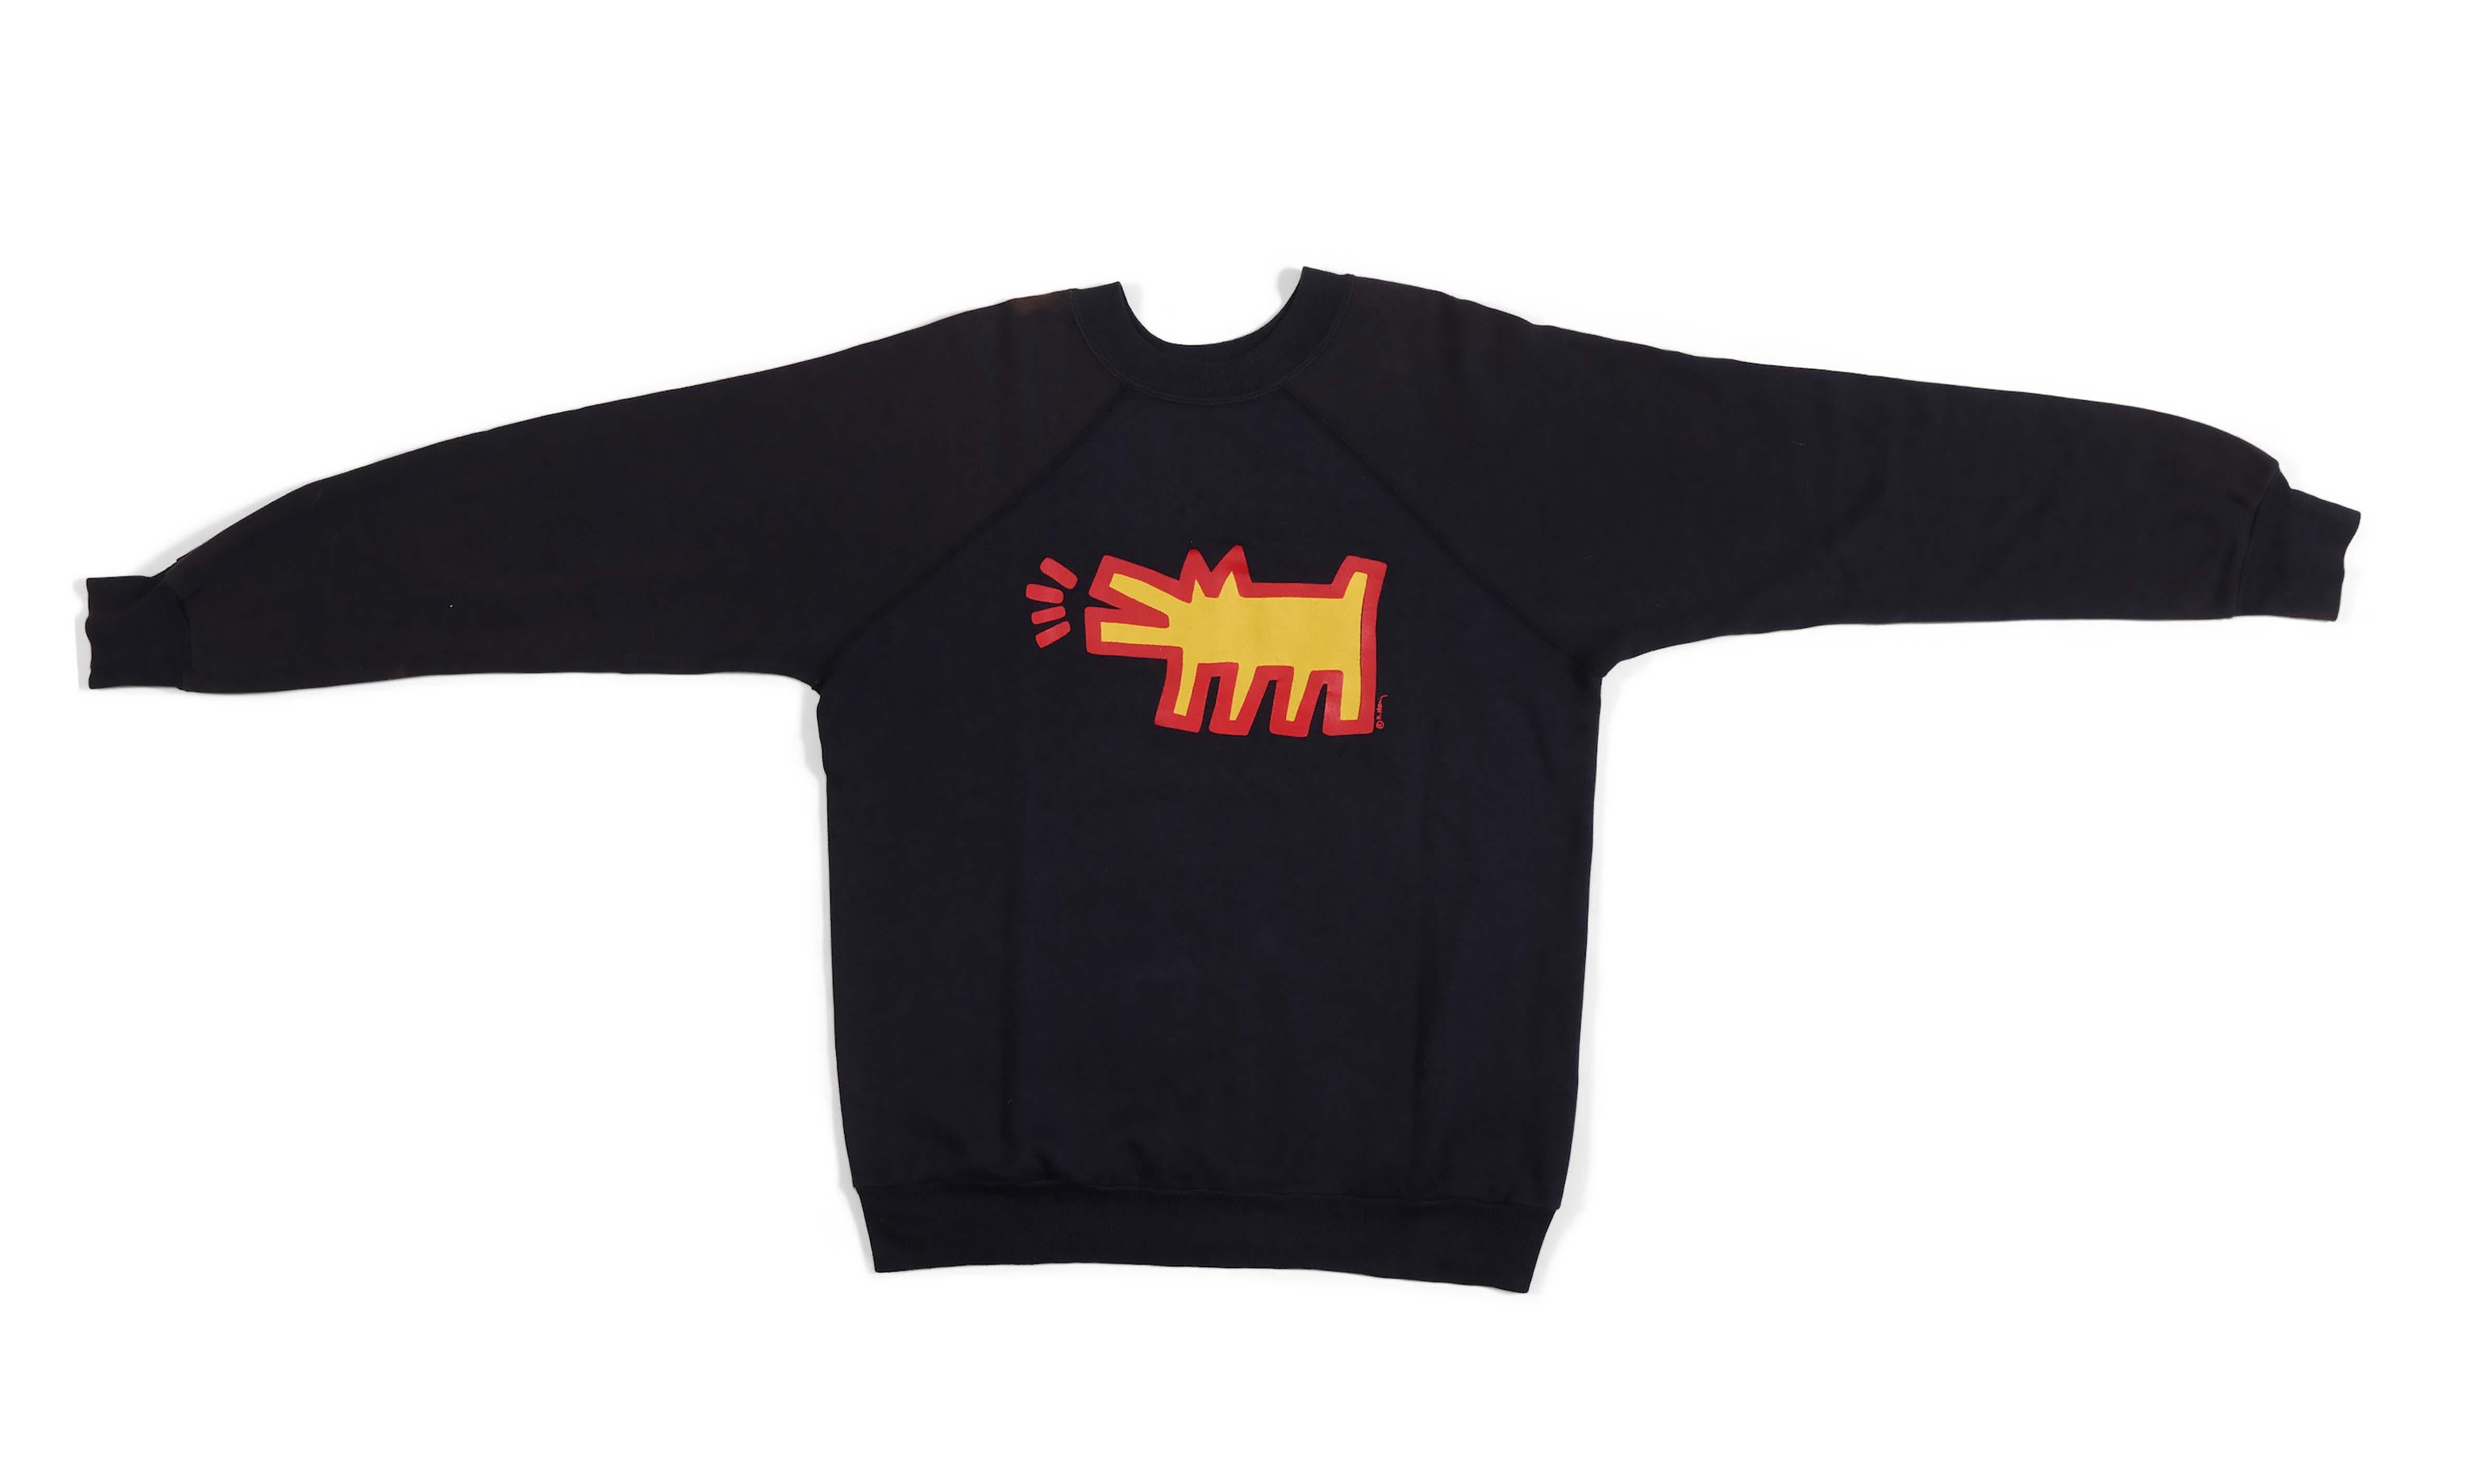 Signed Keith Haring Pop Shop sweatshirt c.1986 (Keith Haring Radiant Baby) For Sale 1